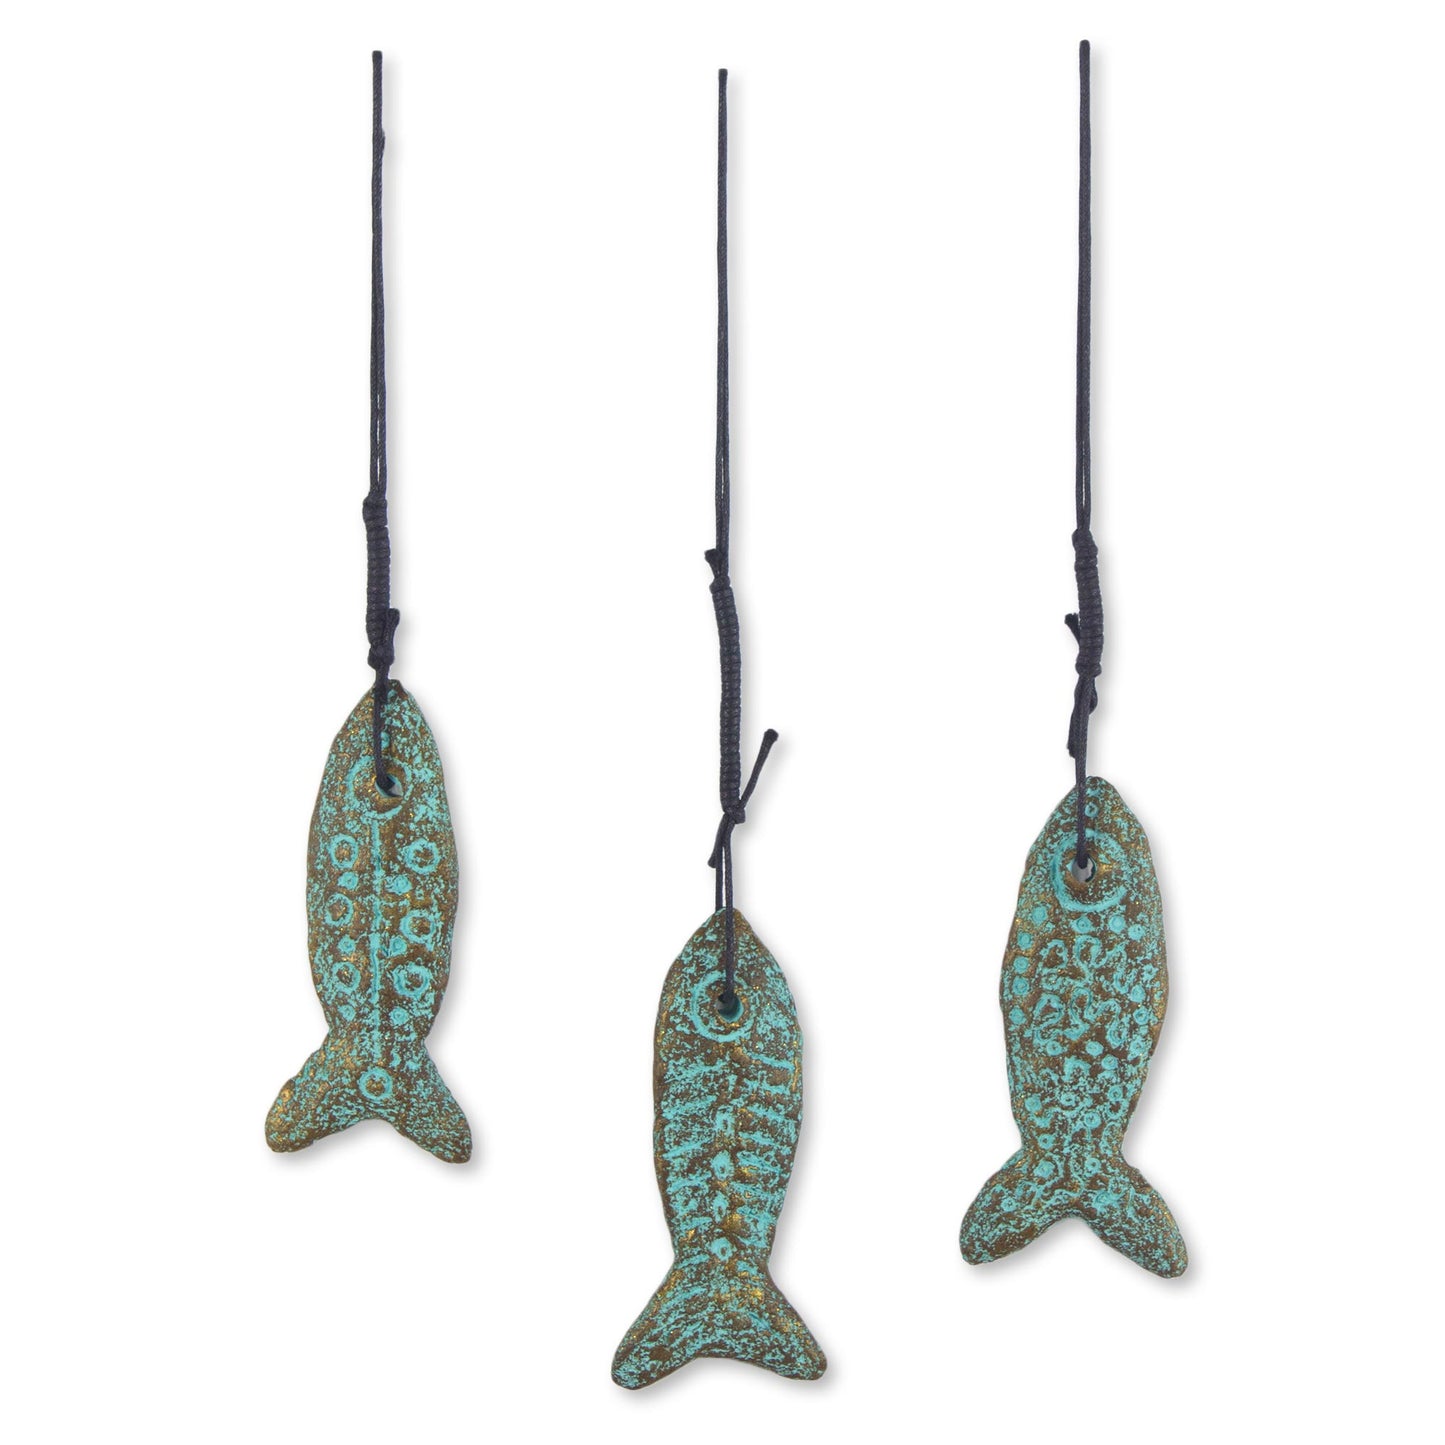 Happiness Fish Handmade Recycled Paper Fish Buddhism Ornaments (Set of 3)